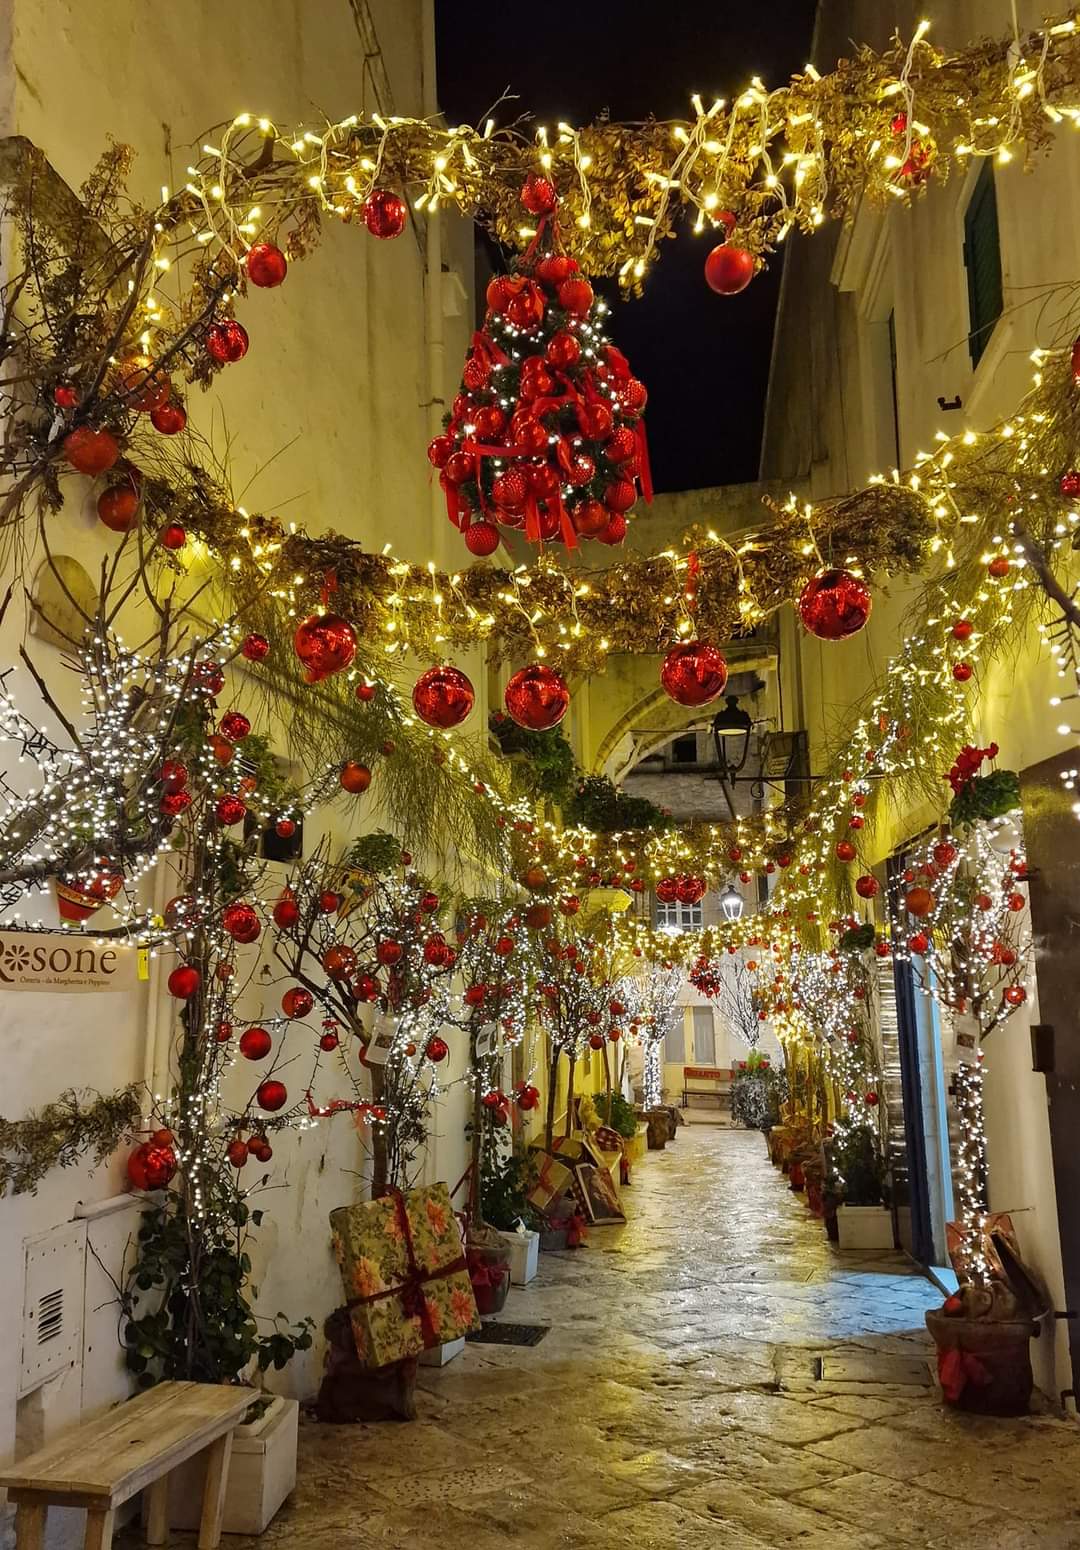 Locotorondo old town decorated for Christmas in Puglia, Italy